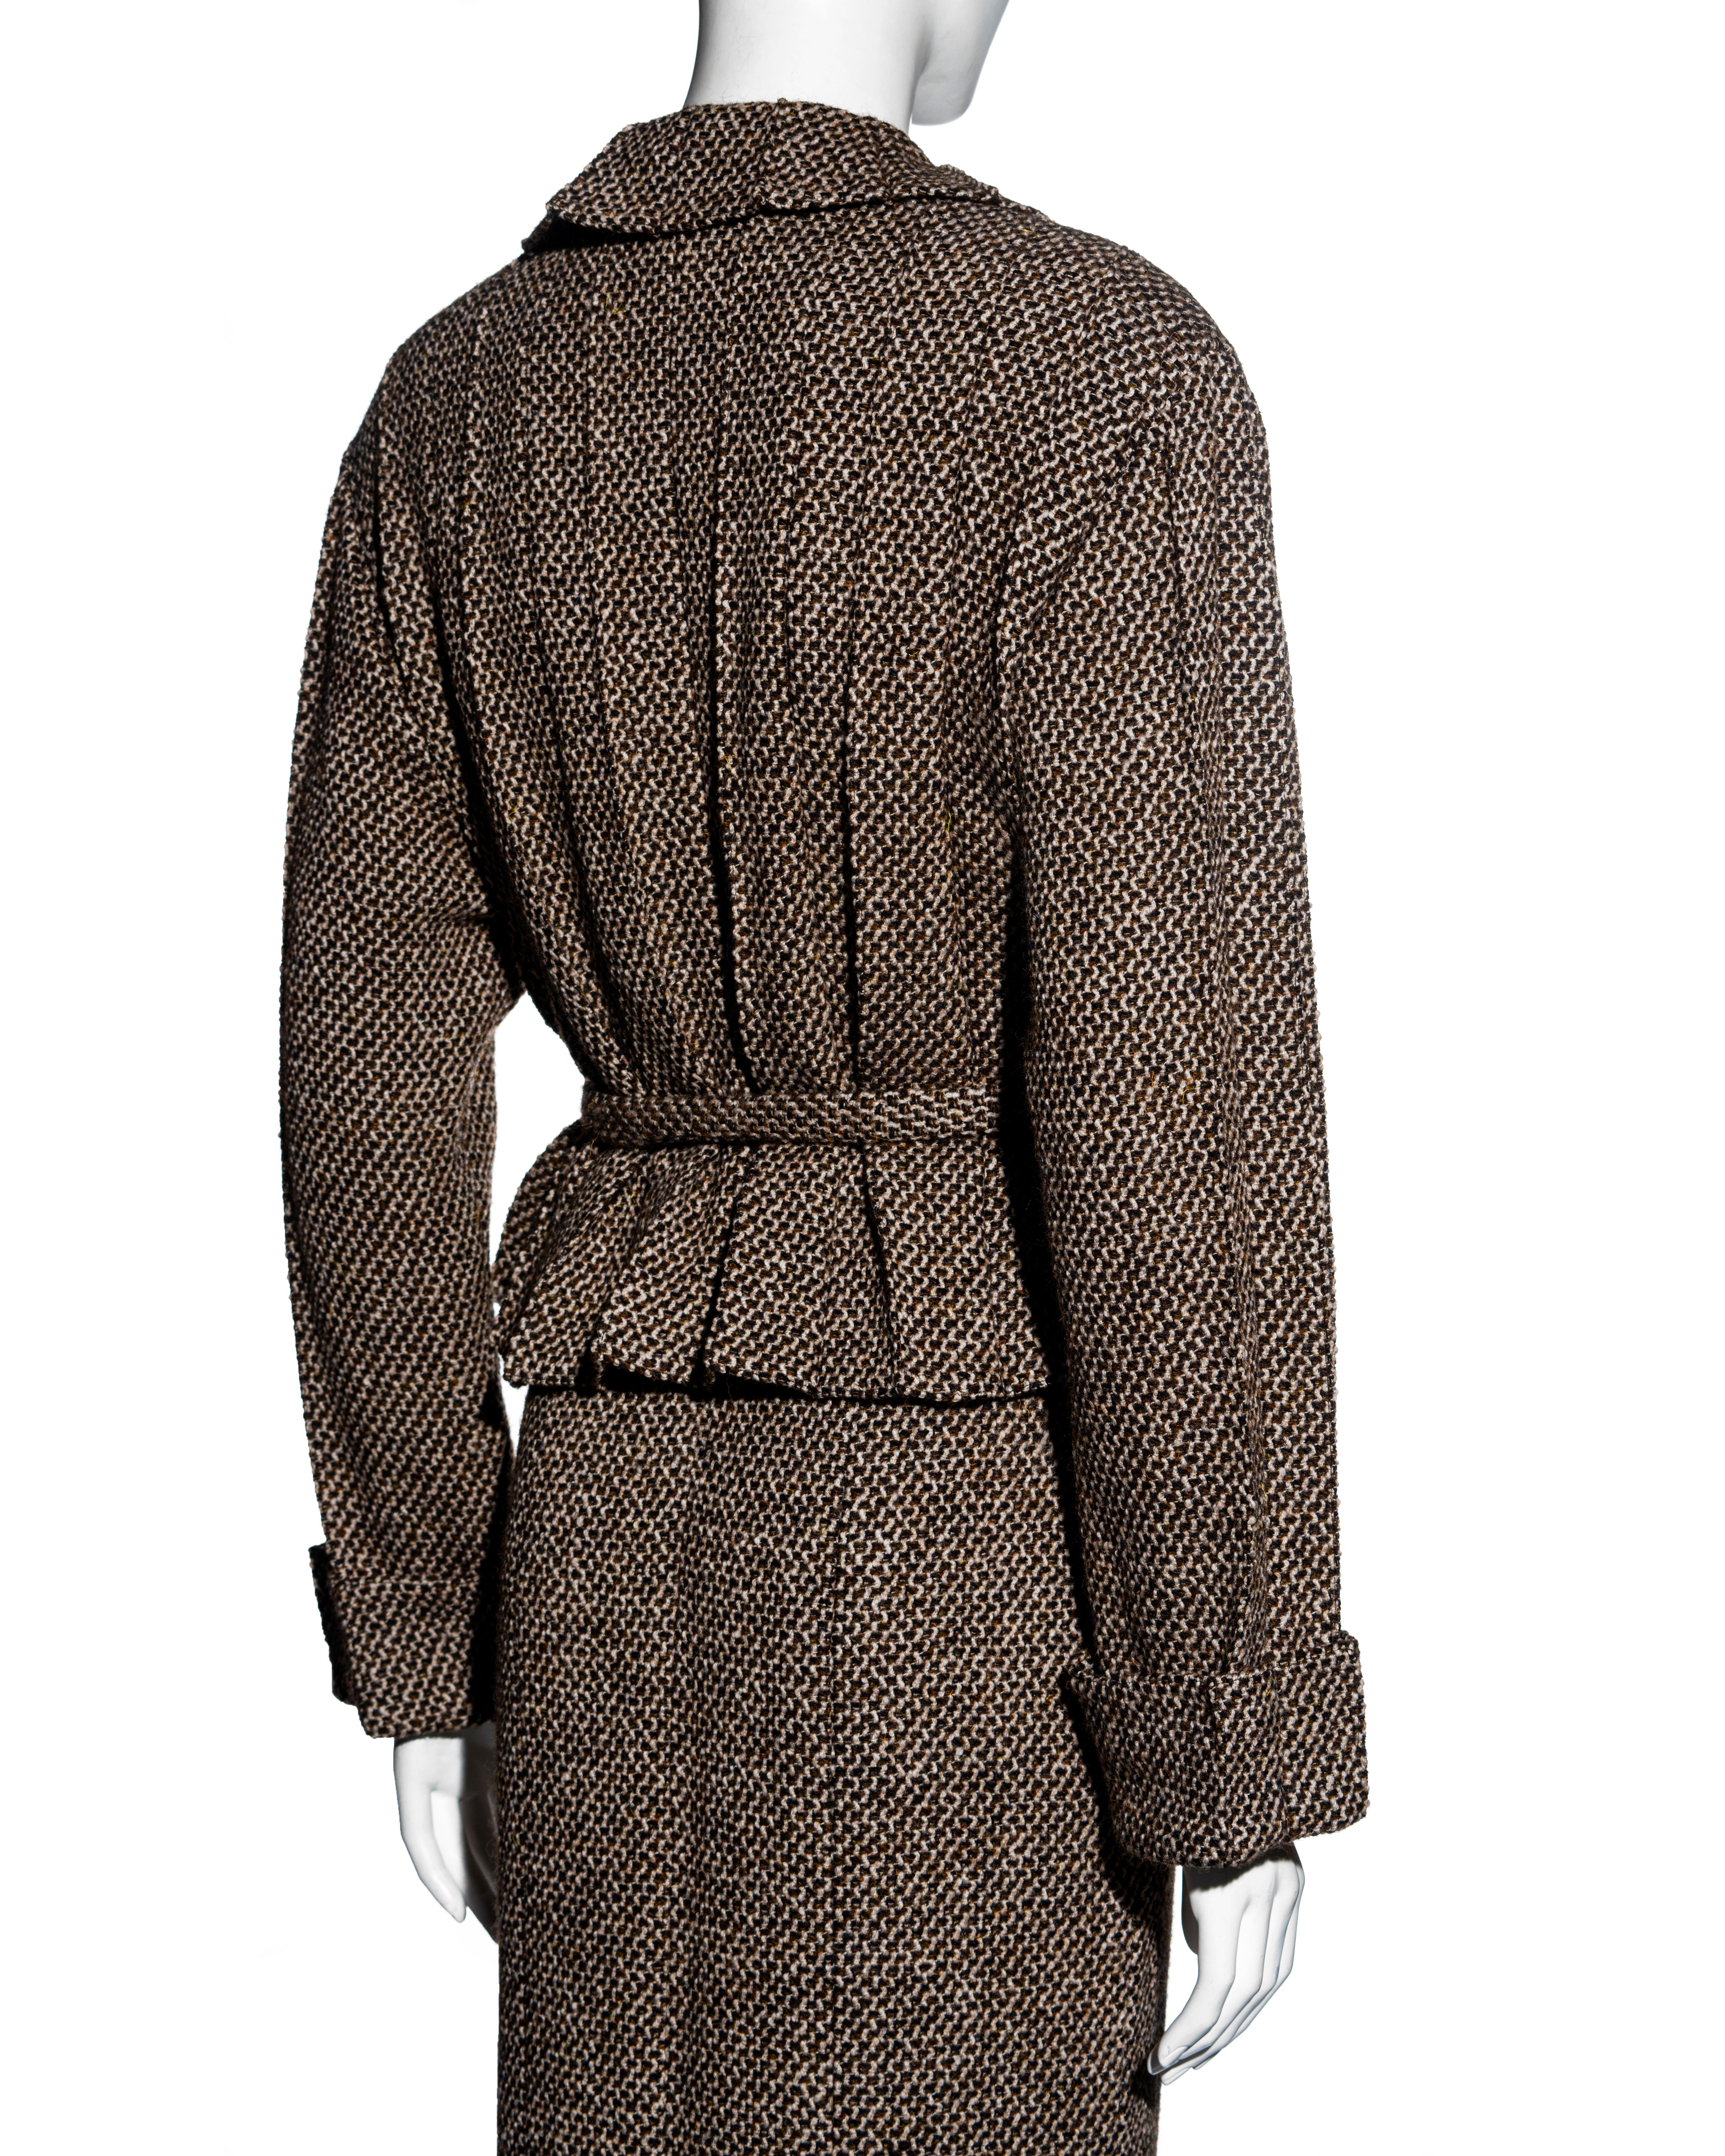 Chanel by Karl Lagerfeld brown tweed pleated jacket maxi skirt suit, fw 1998 For Sale 1